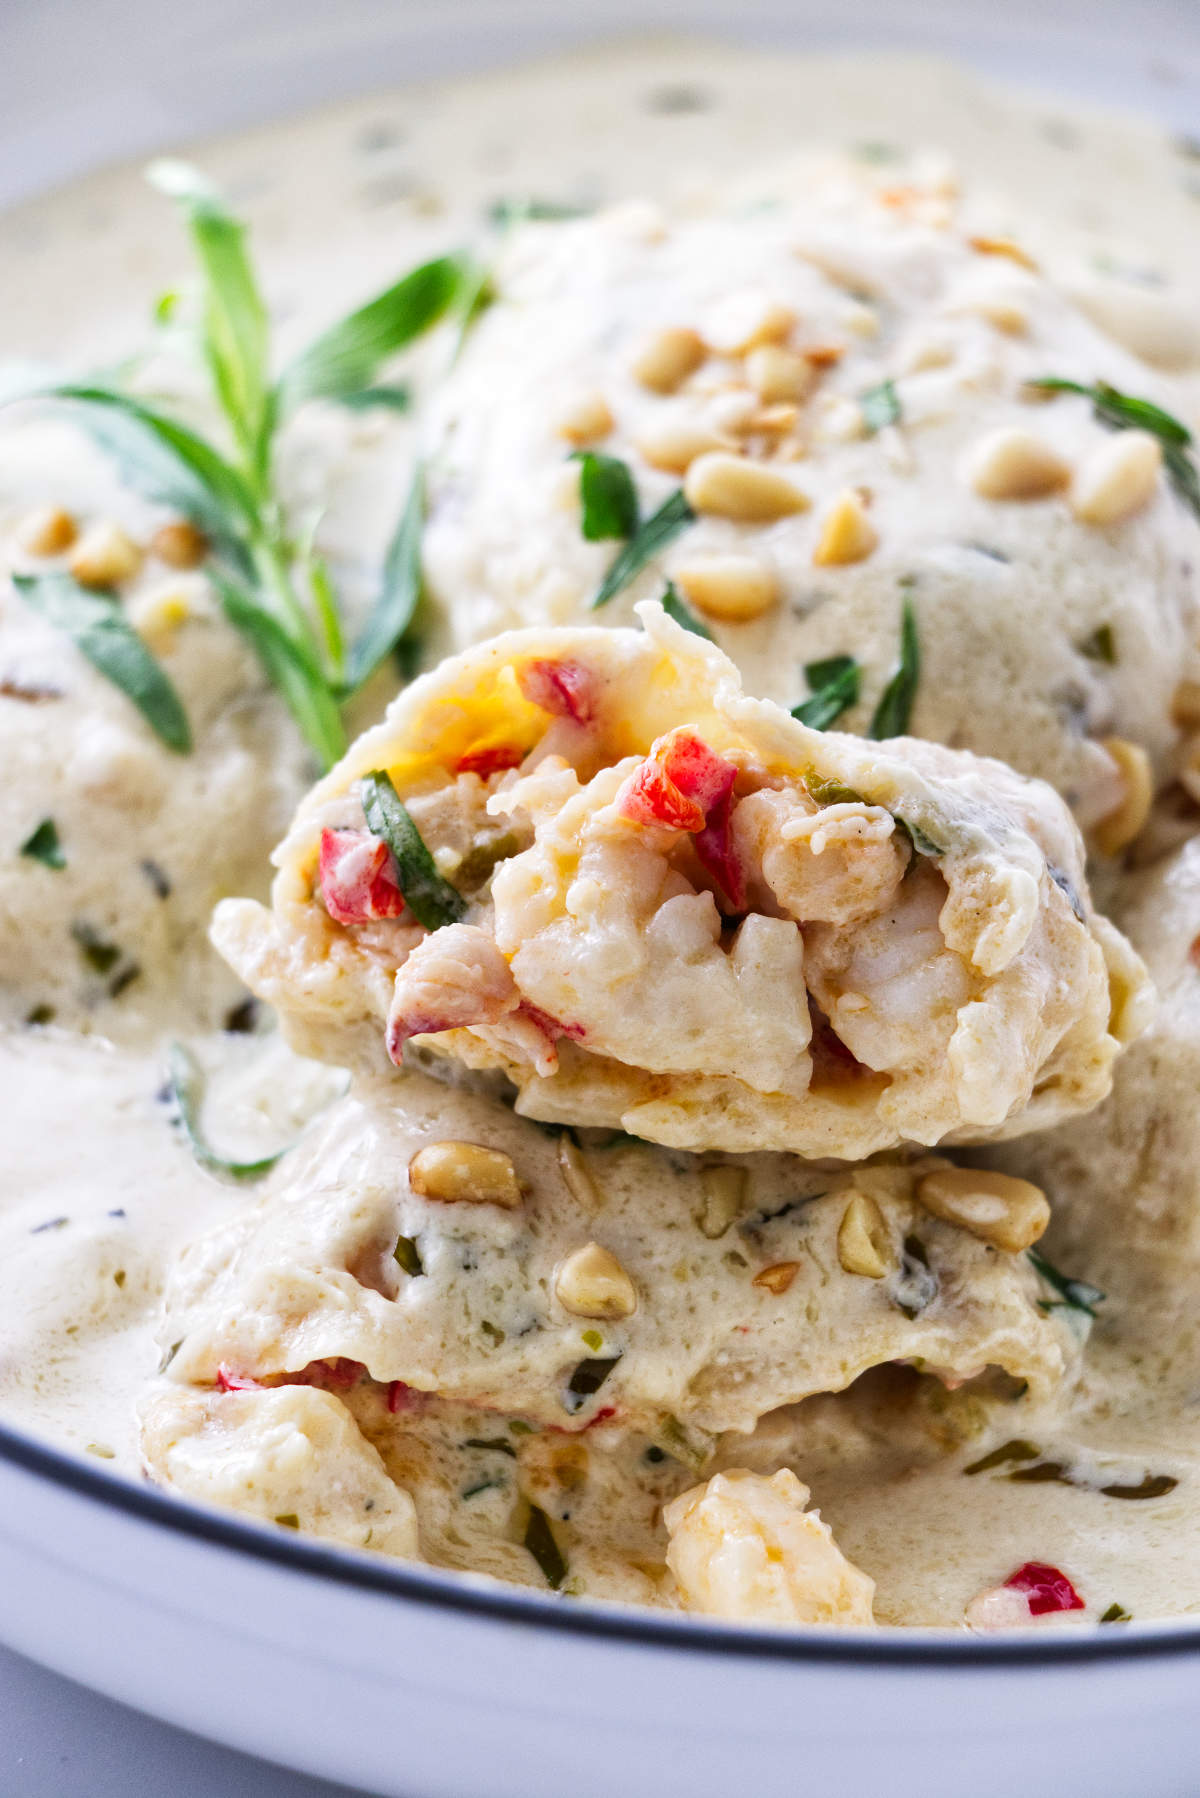 A ravioli with lobster filling.